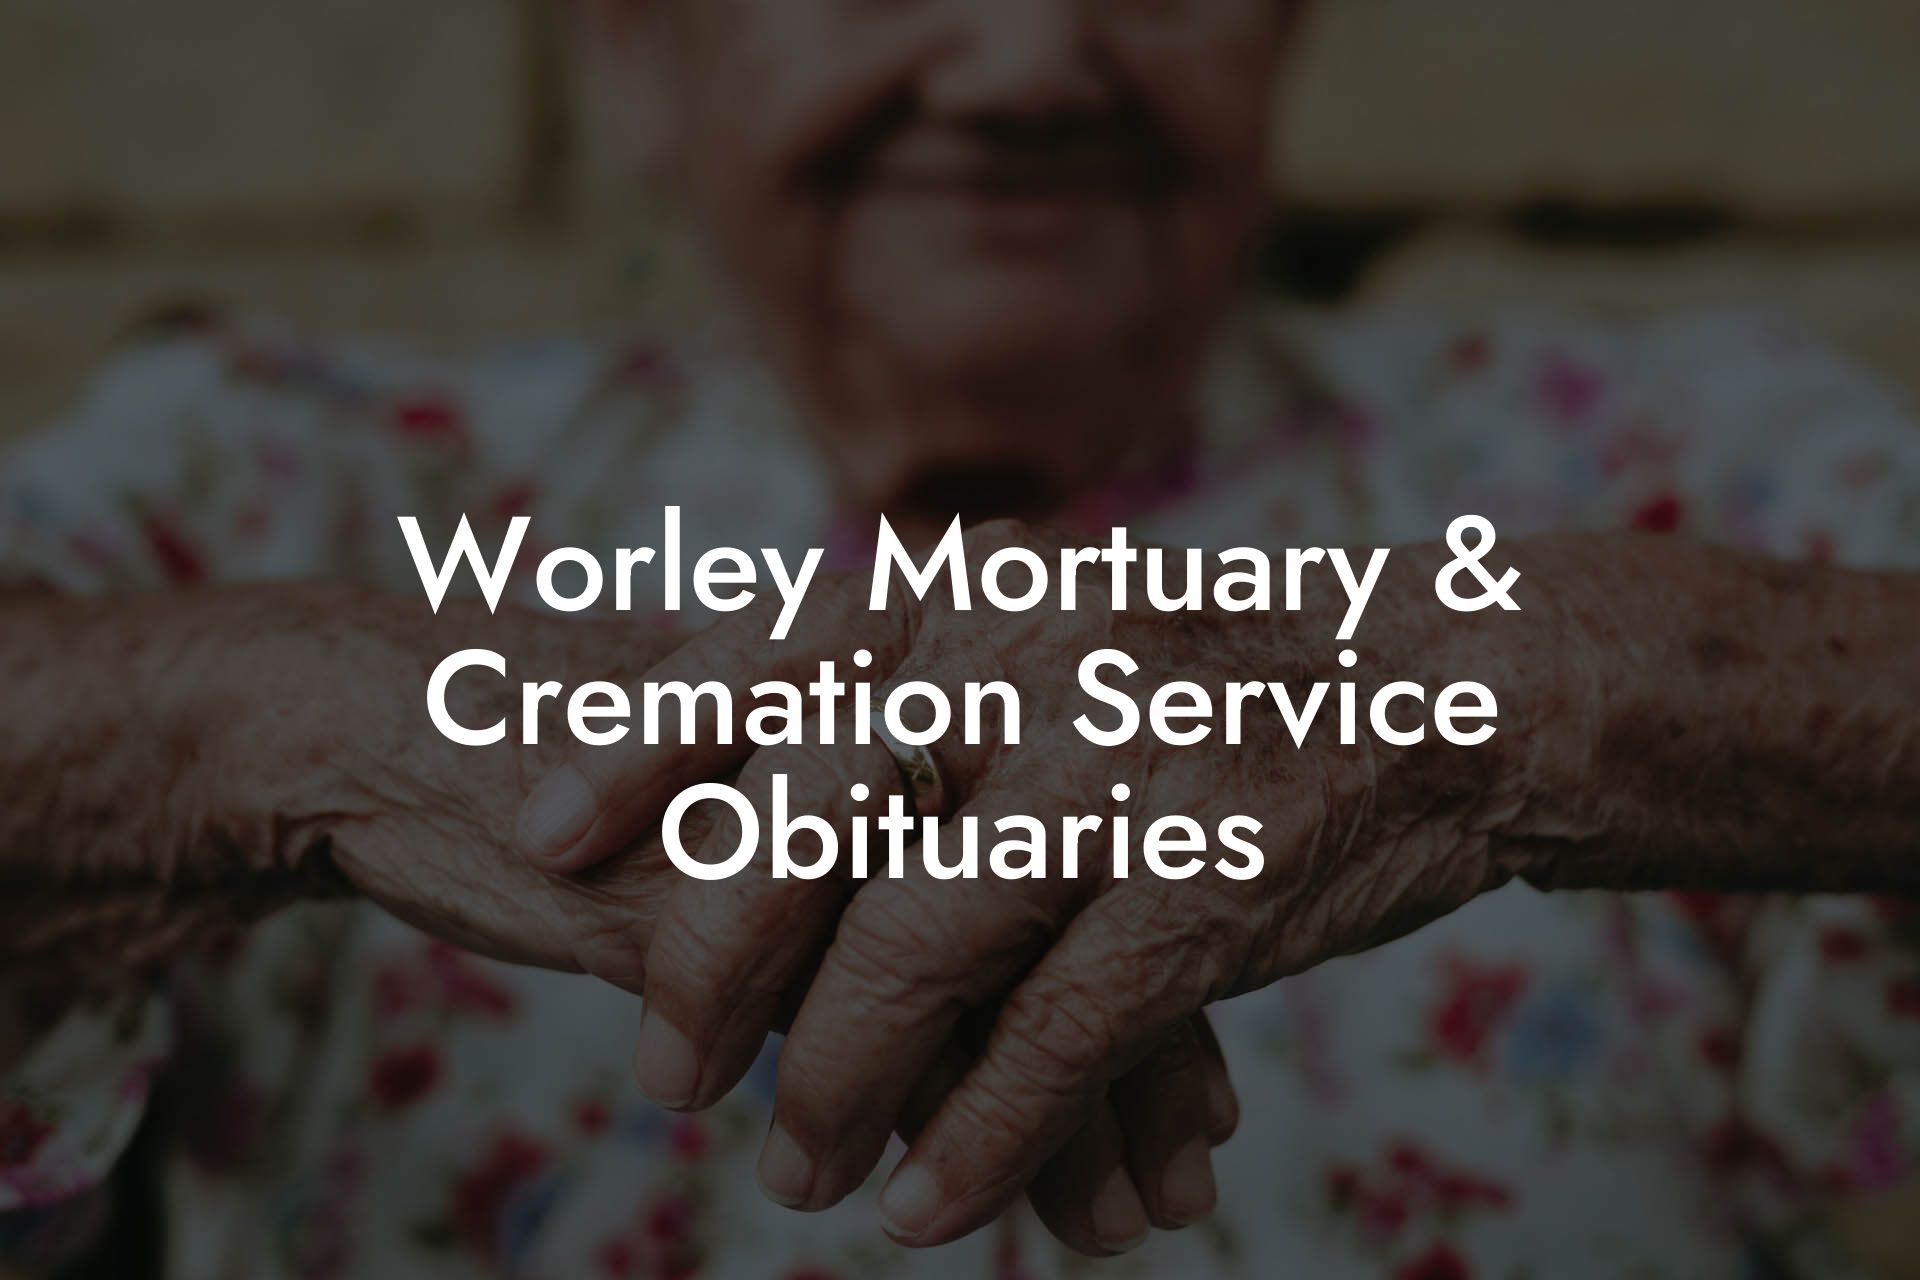 Worley Mortuary & Cremation Service Obituaries